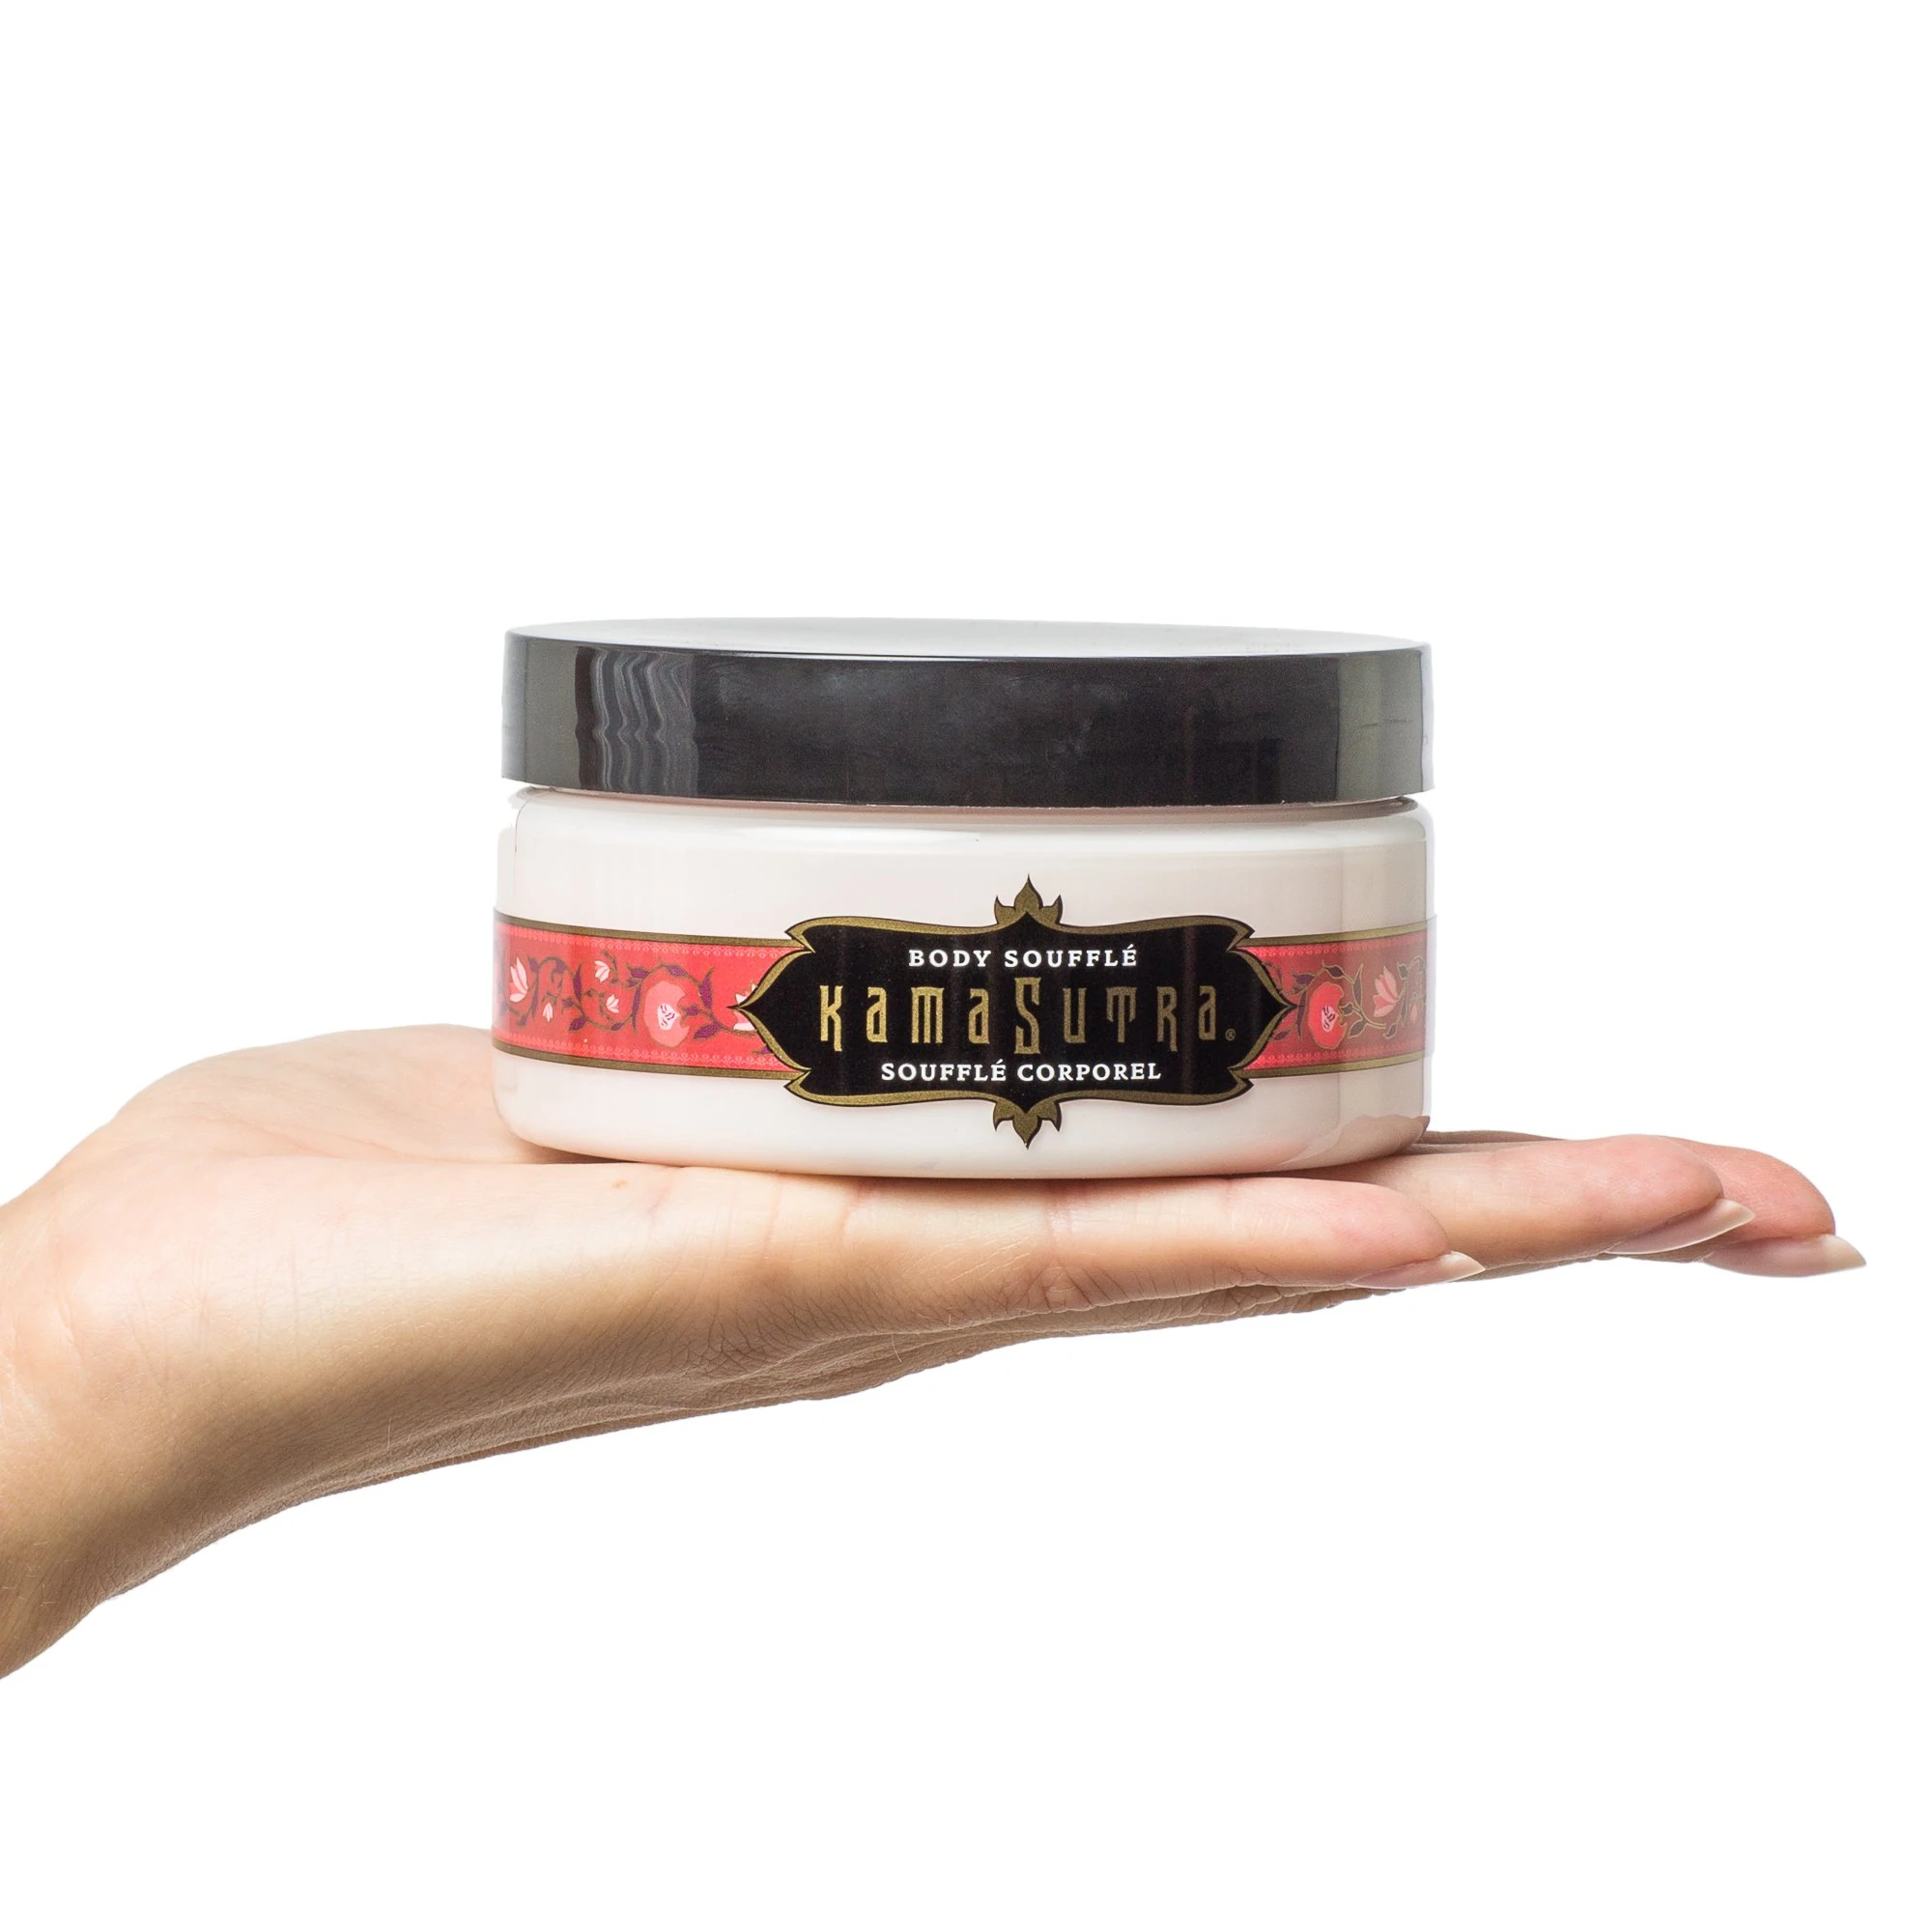 Kama Sutra's Body Souffle-moisturizing creme shown being held by female hand